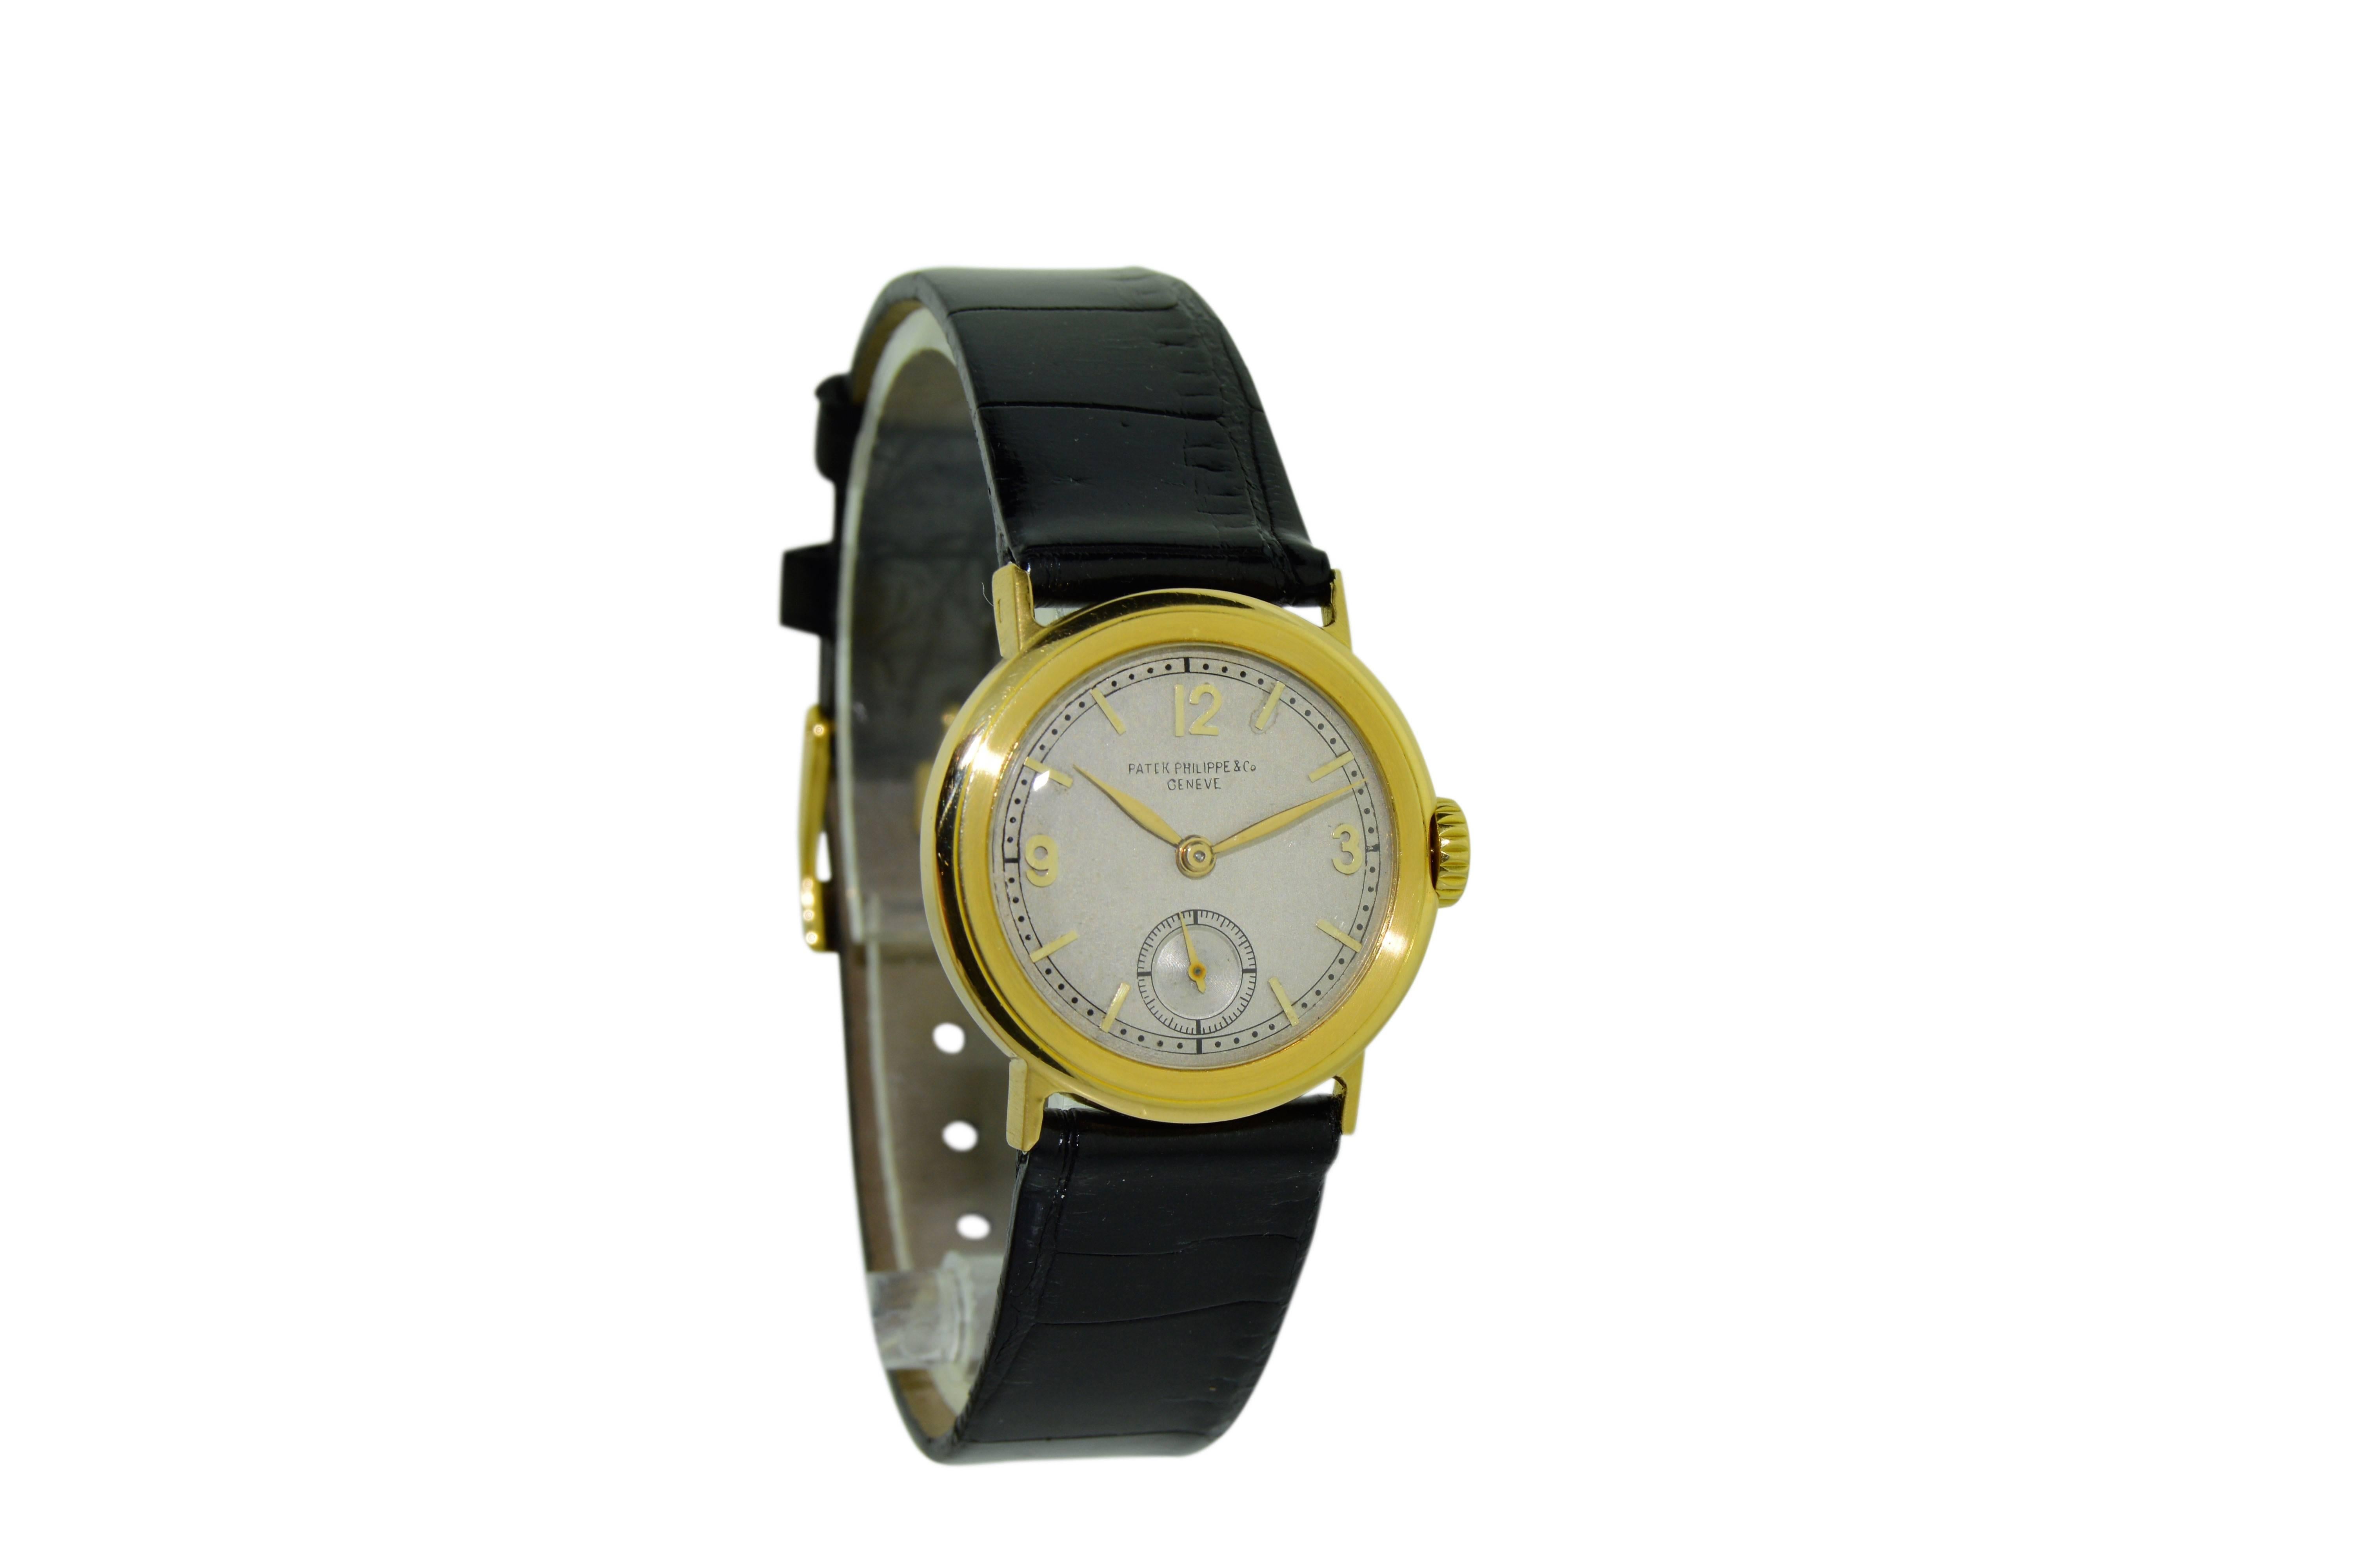 FACTORY / HOUSE: Patek Philippe 
STYLE / REFERENCE: Round Art Deco
METAL / MATERIAL: 18Kt. Yellow Gold 
DIMENSIONS:  30mm  X  27mm
CIRCA: 1943
MOVEMENT / CALIBER: Manual Winding / 18 Jewels / 8 Adjustments
DIAL / HANDS: Original / Silver w/ Enamel